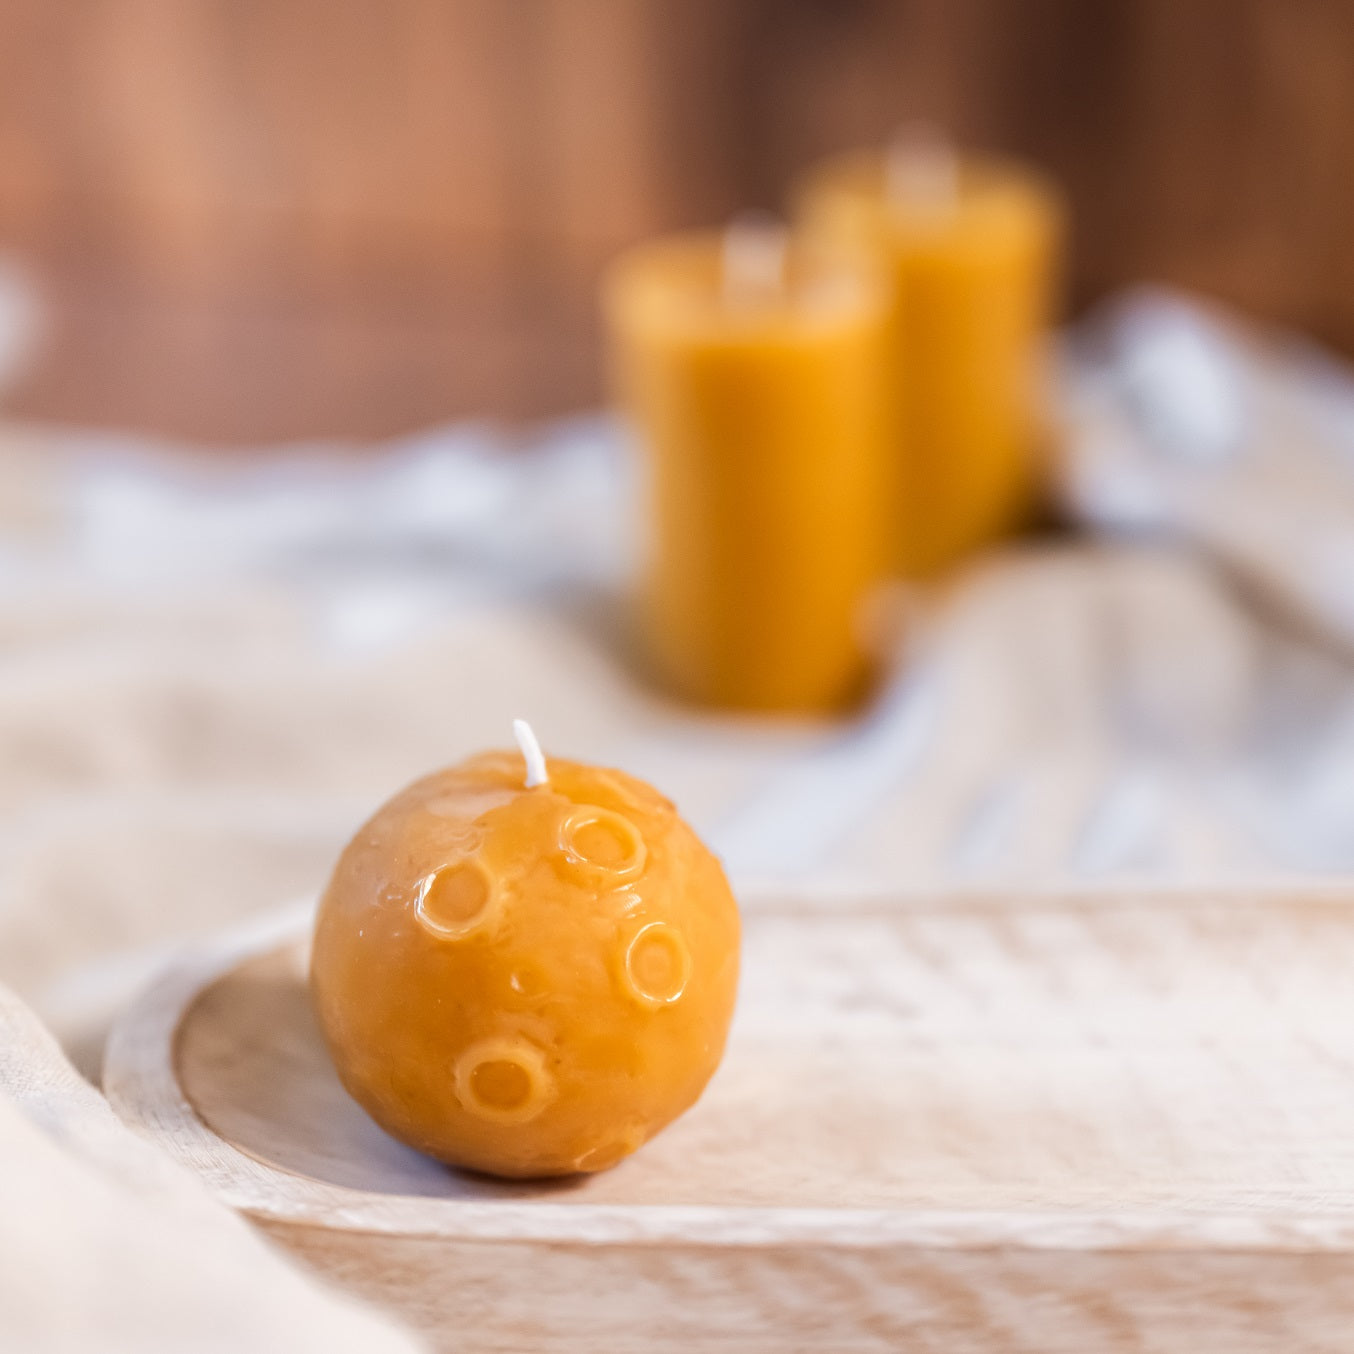 Full Moon Beeswax Candle. Unscented